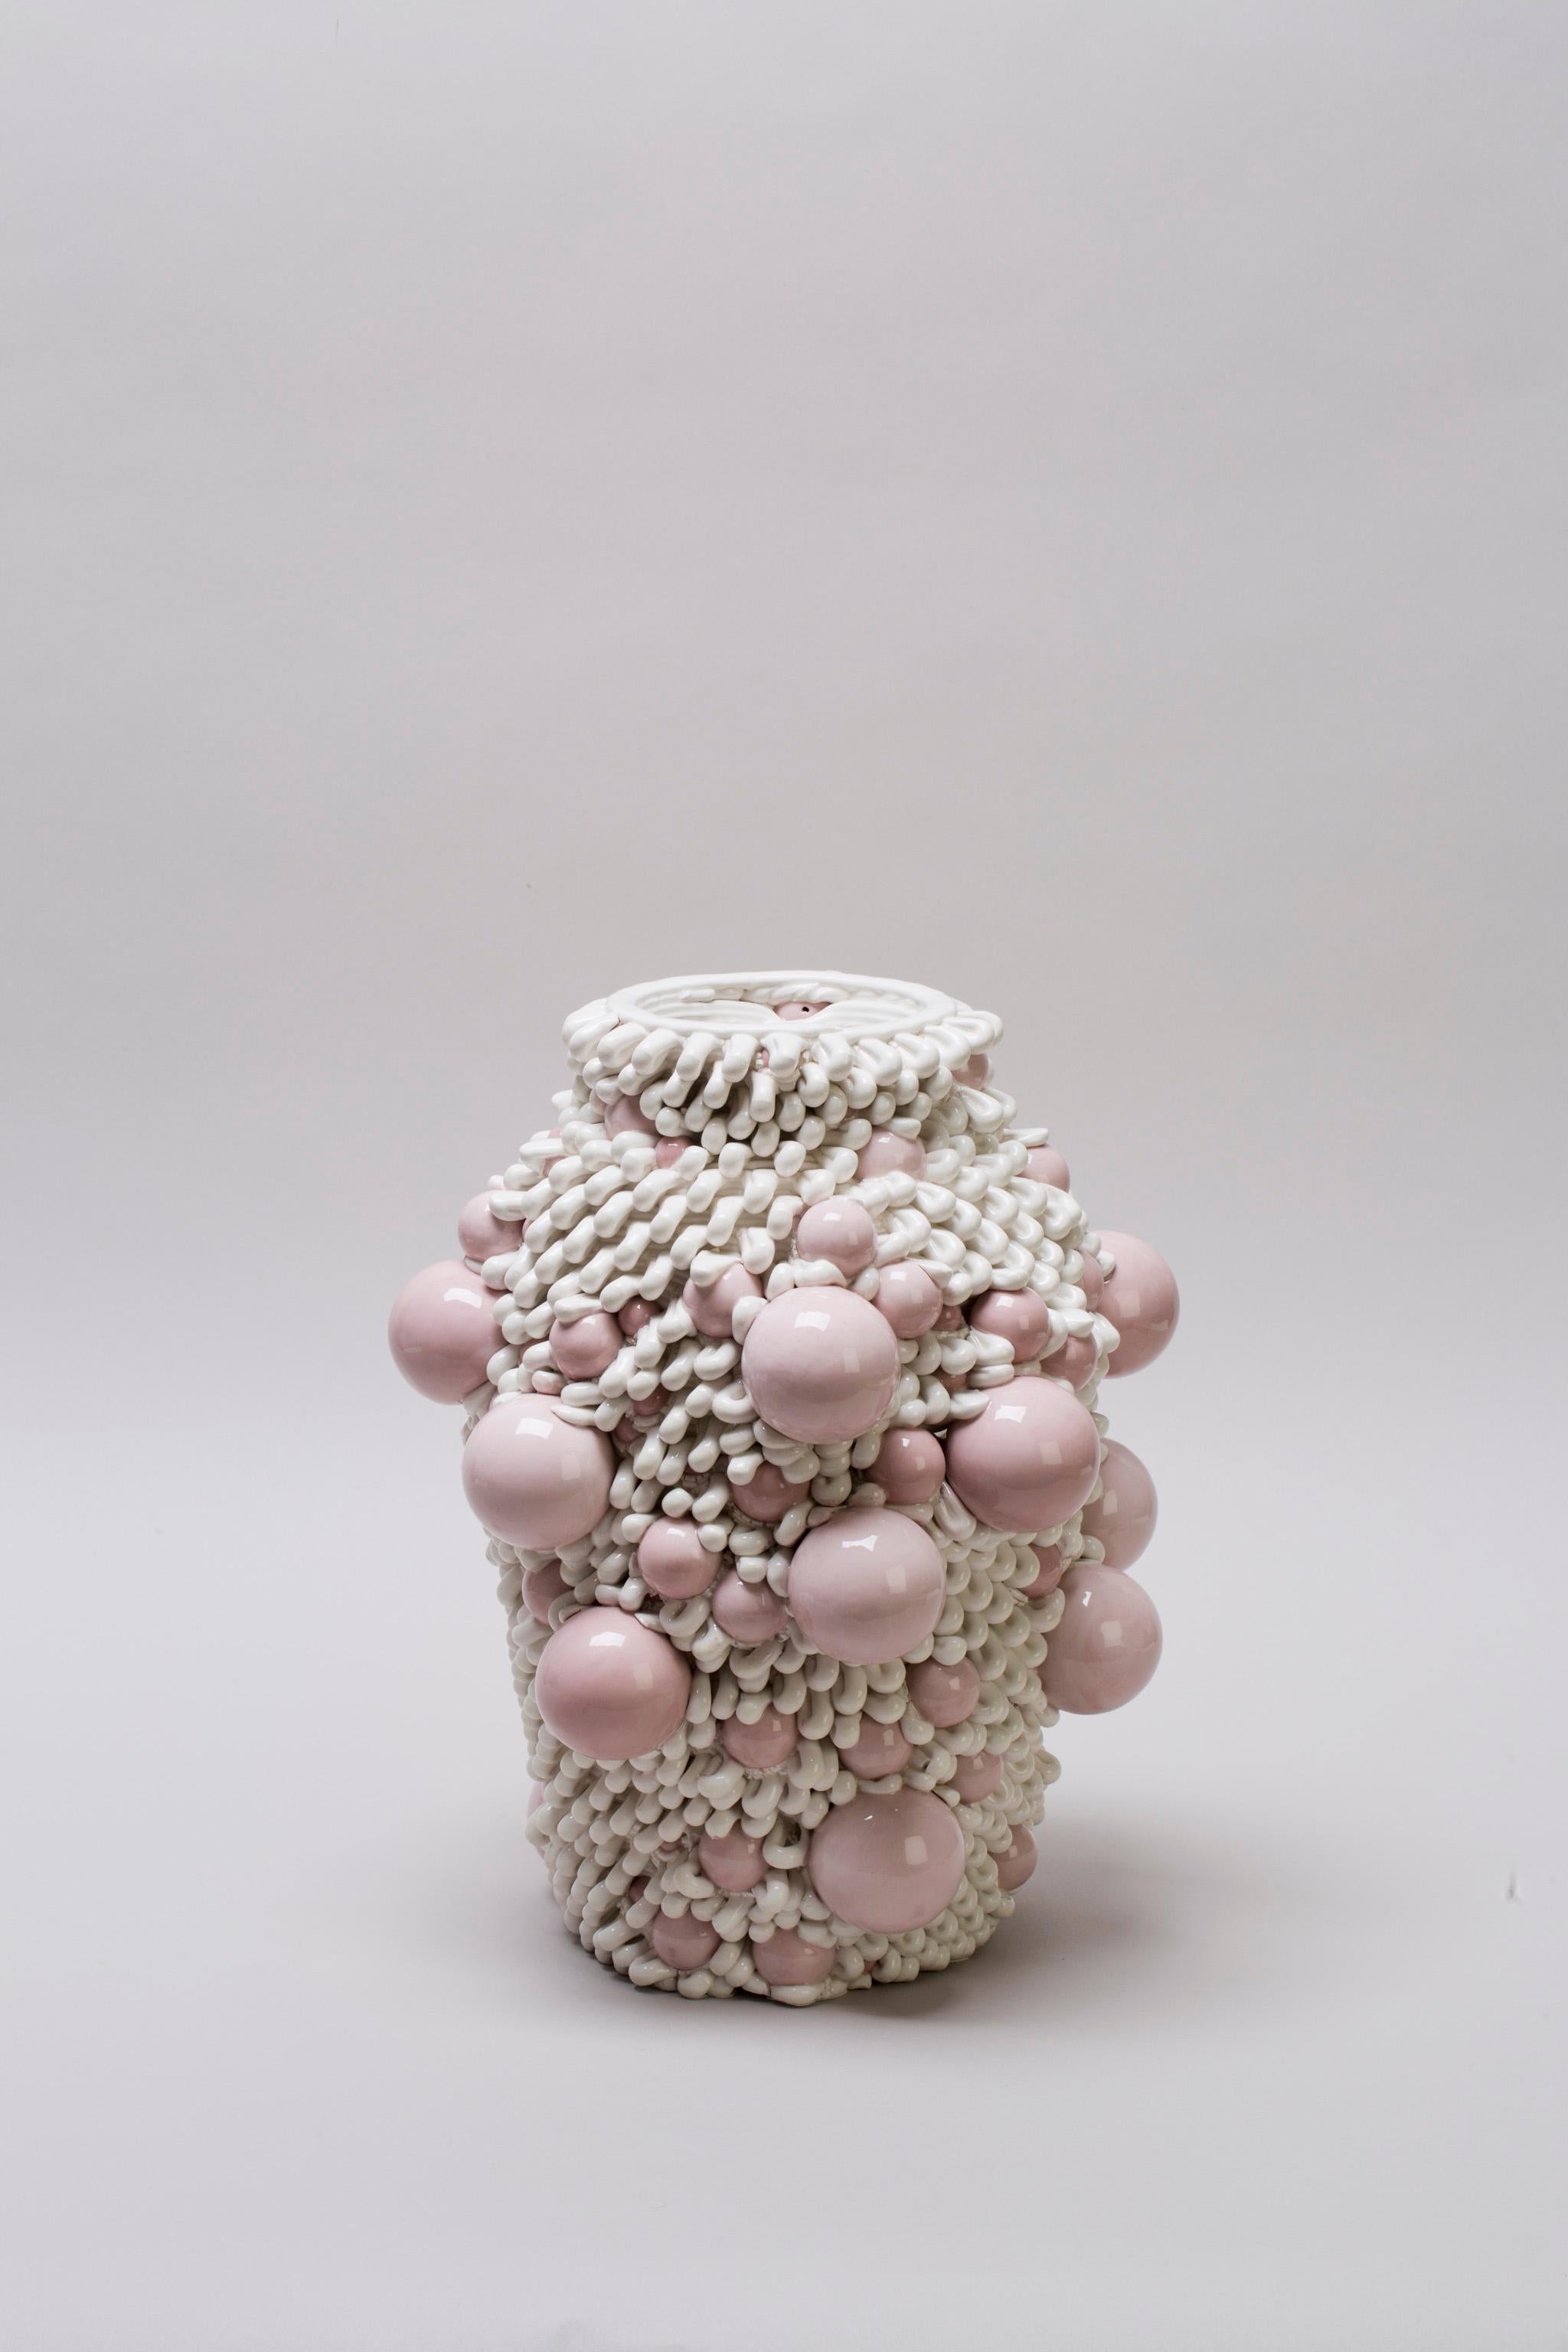 White 3D Printed Ceramic Sculptural Vase Italy Contemporary, 21st Century For Sale 1